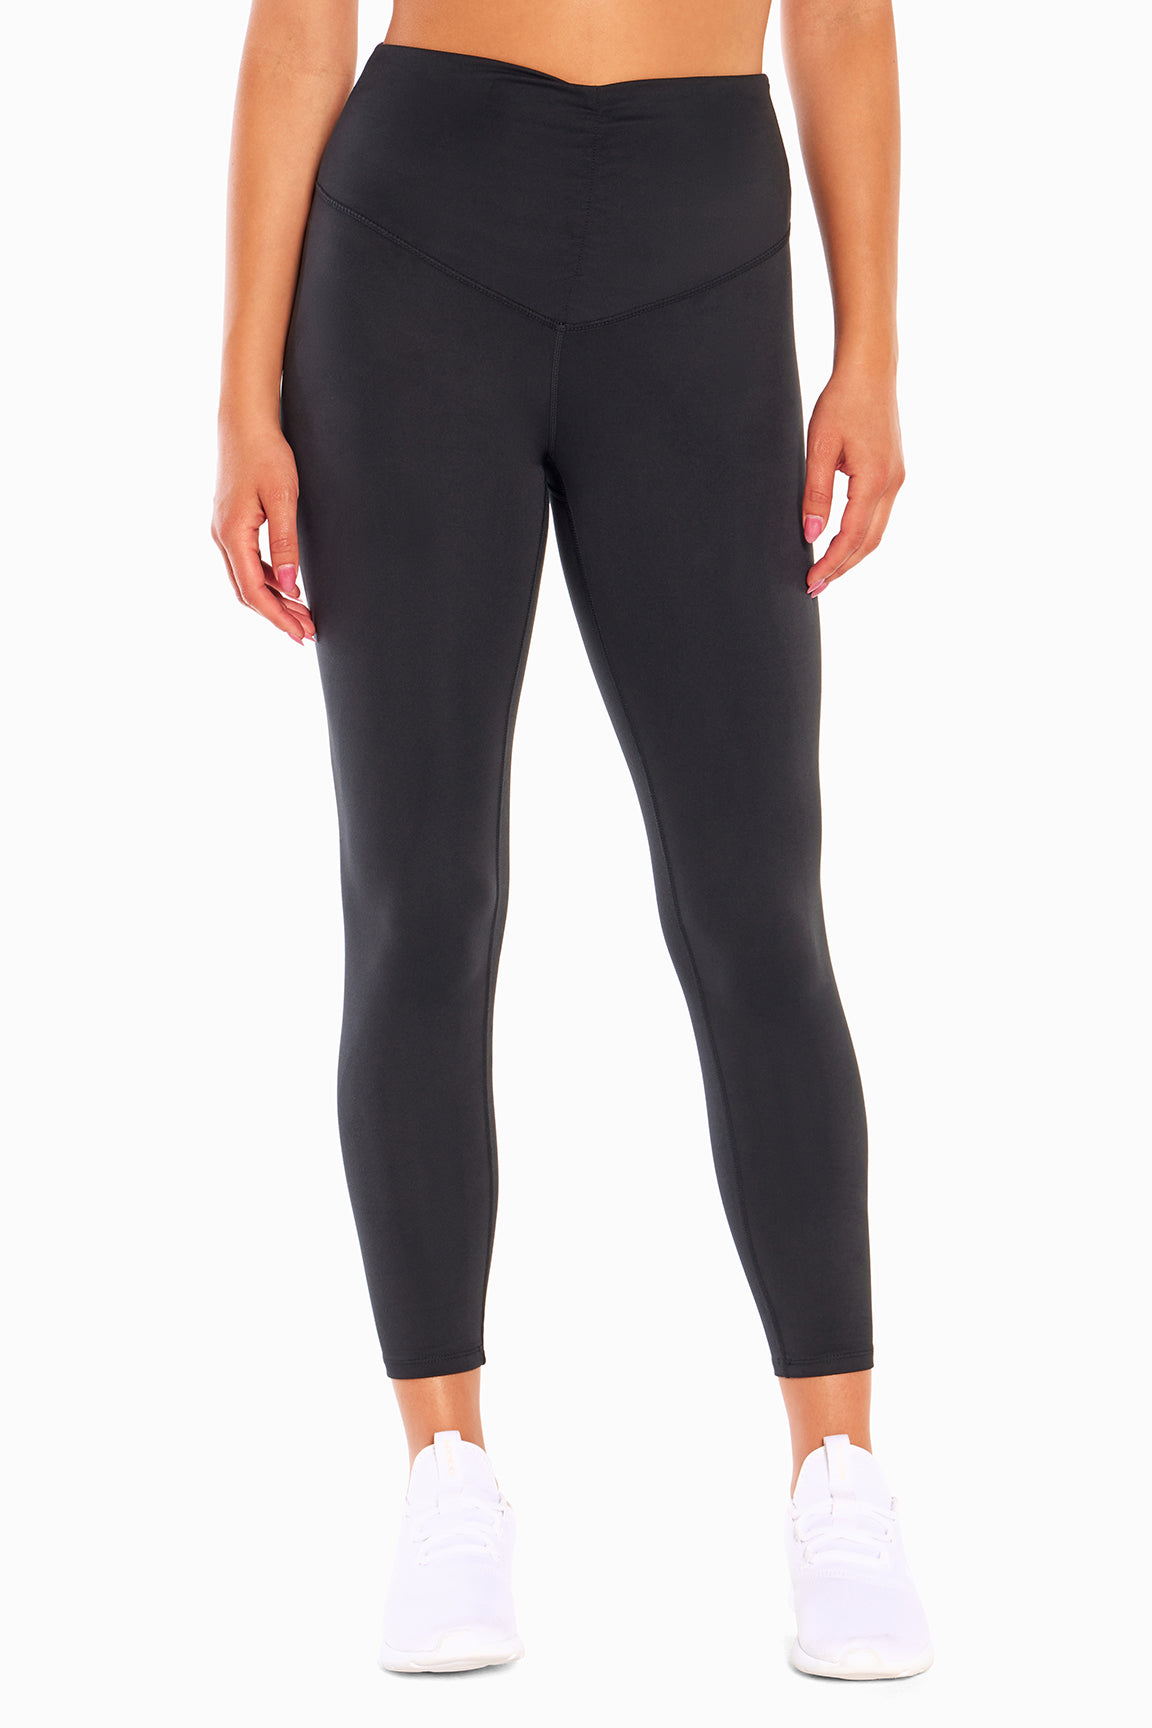 The Balance Collection Sanded Dry Wik Leggings Black, $29